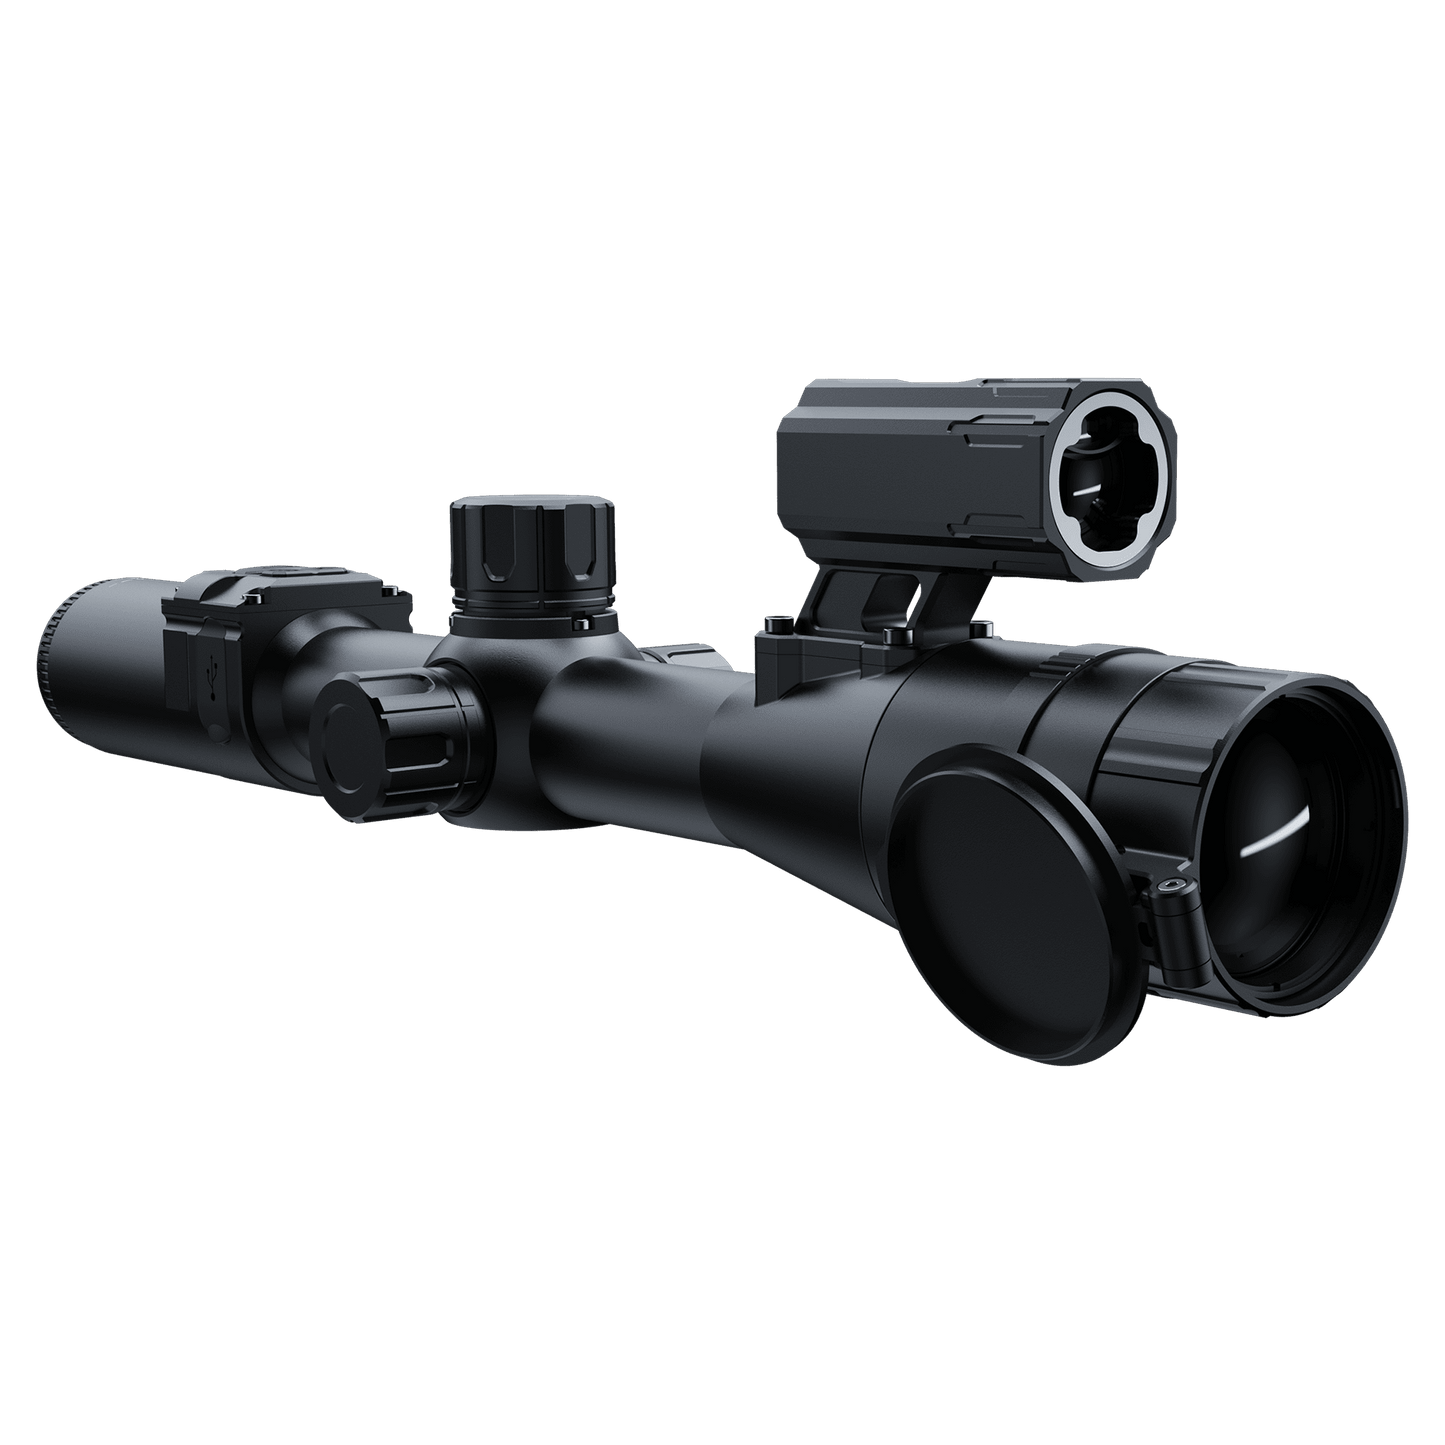 SALE DEMO Pard Thermal Scope TS36-45LRF 640 With LRF